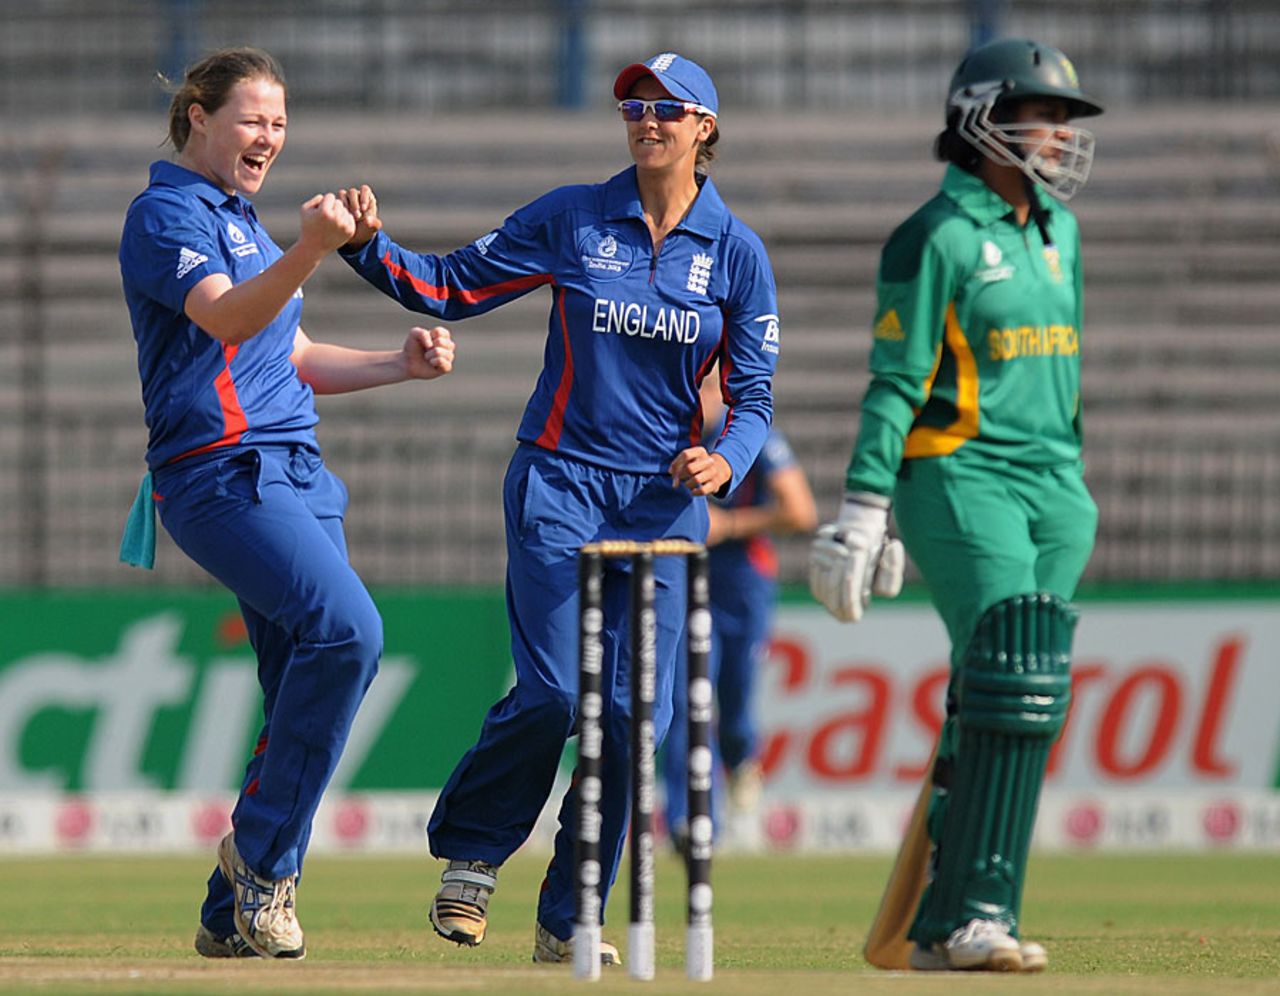 England's Anya Shrubsole took five wickets for 17 runs against South Africa, England v South Africa, Women's World Cup 2013, Super-Six match, Cuttack, February 10, 2013